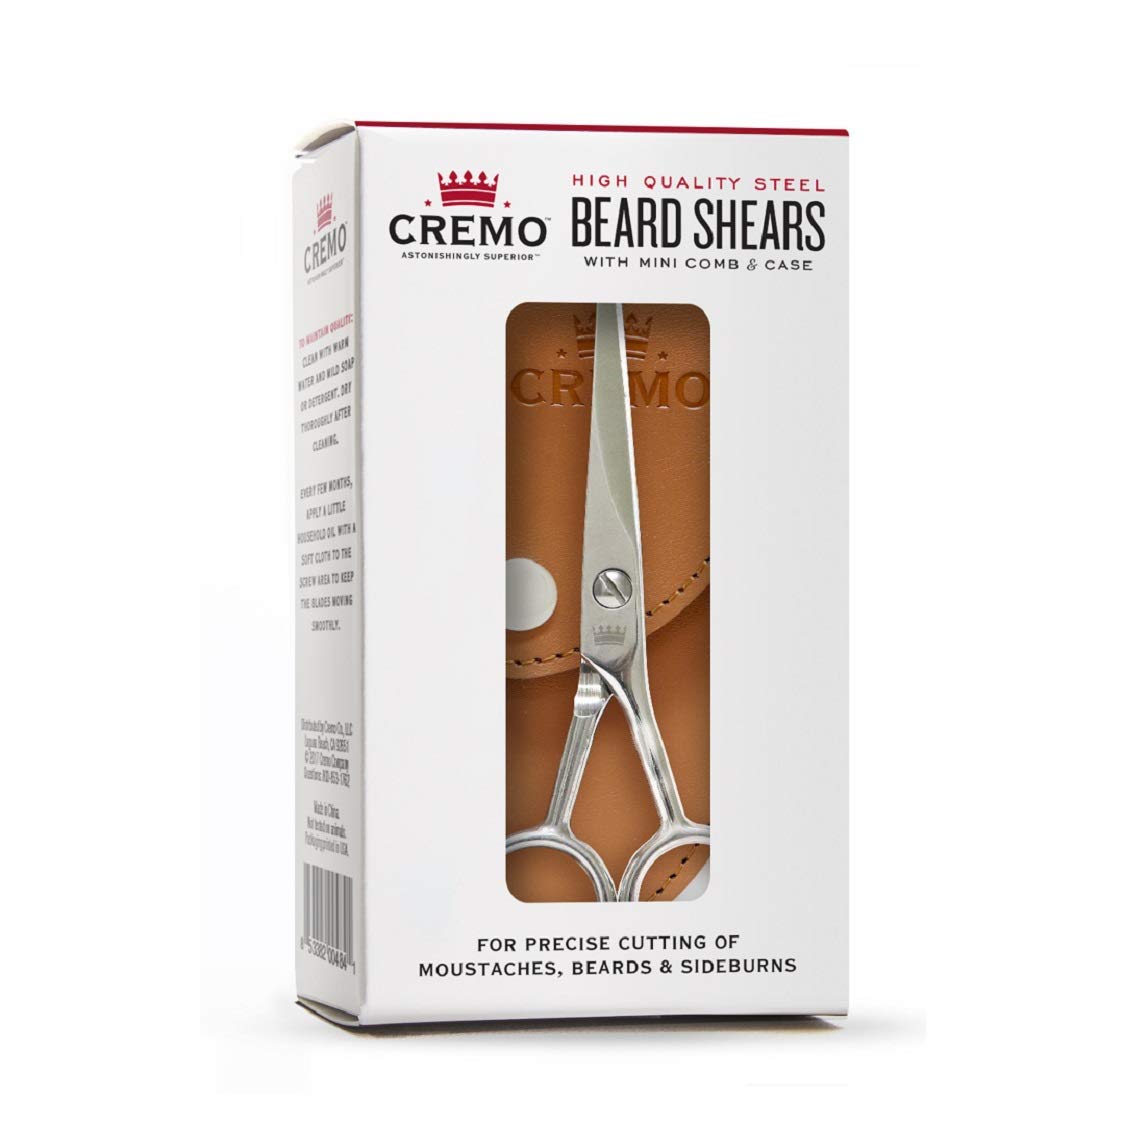 Cremo Beard Accessories, Beard and Mustache Stainless Steel Beard Shears with Synthetic Leather Carrying Case and Comb - Shape, Style And Groom Any Length Facial Hair